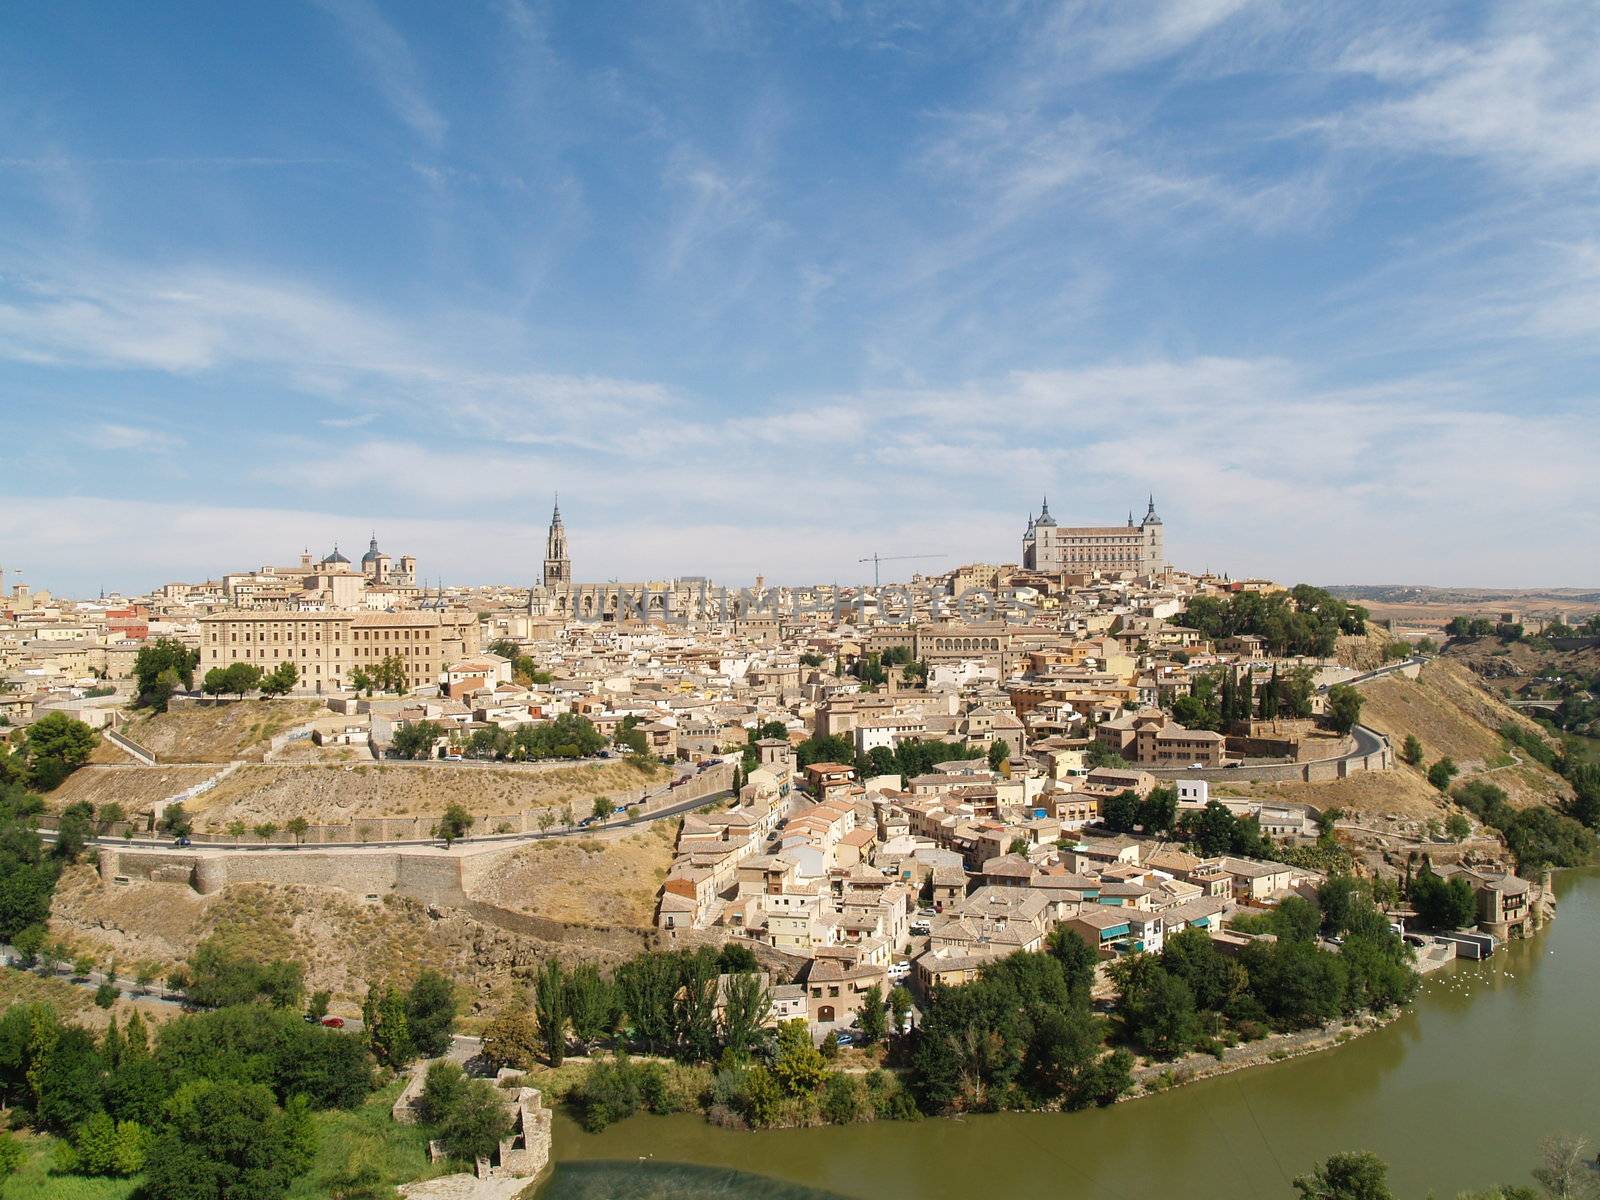 View on the city of Toledo, Spain







View on the city of Toledo, Spain.